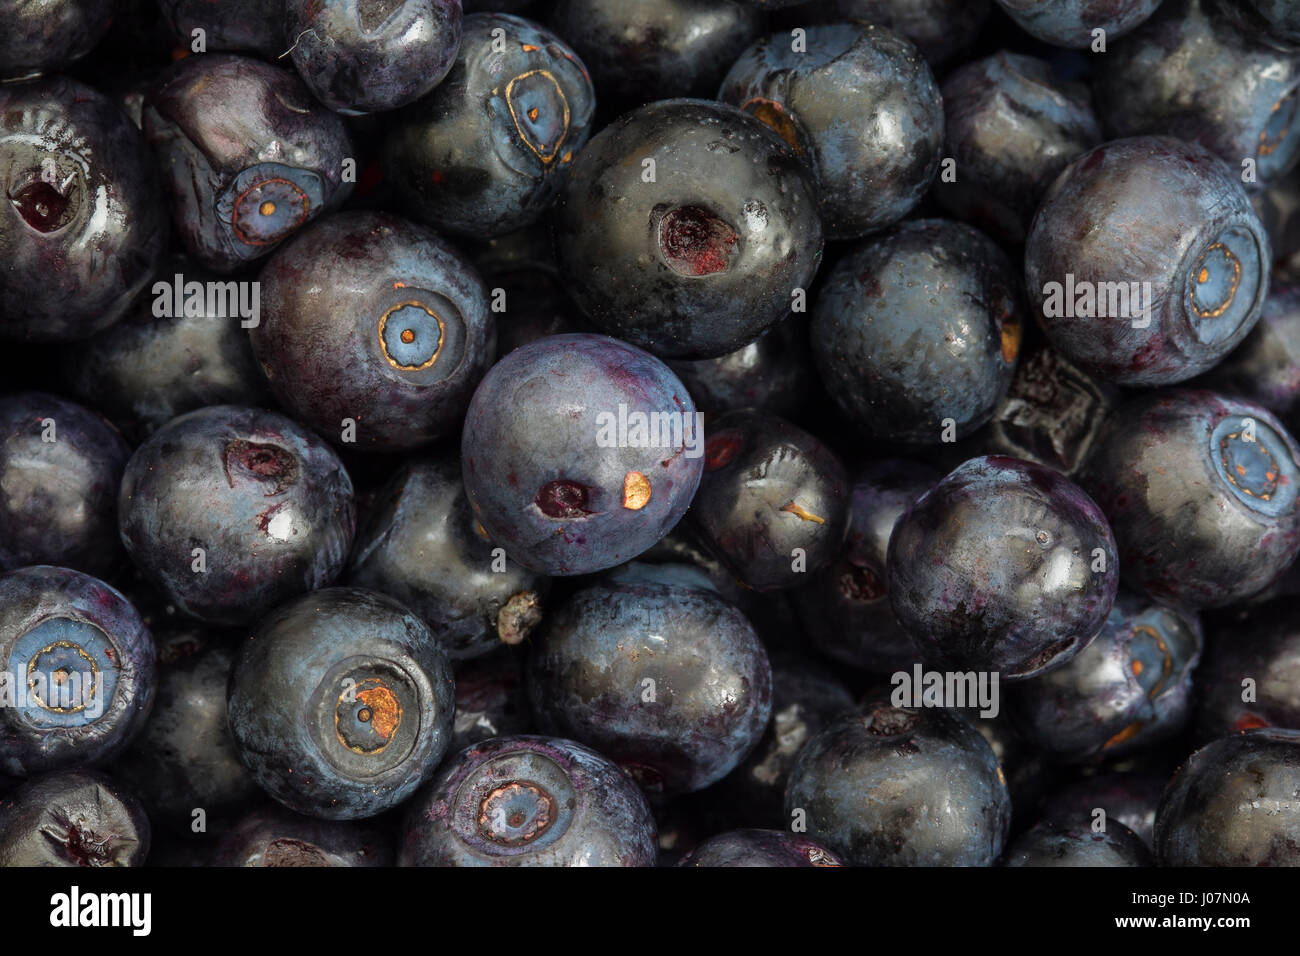 European blueberry / bilberry / whortleberry (Vaccinium myrtillus), close up of harvested berries Stock Photo